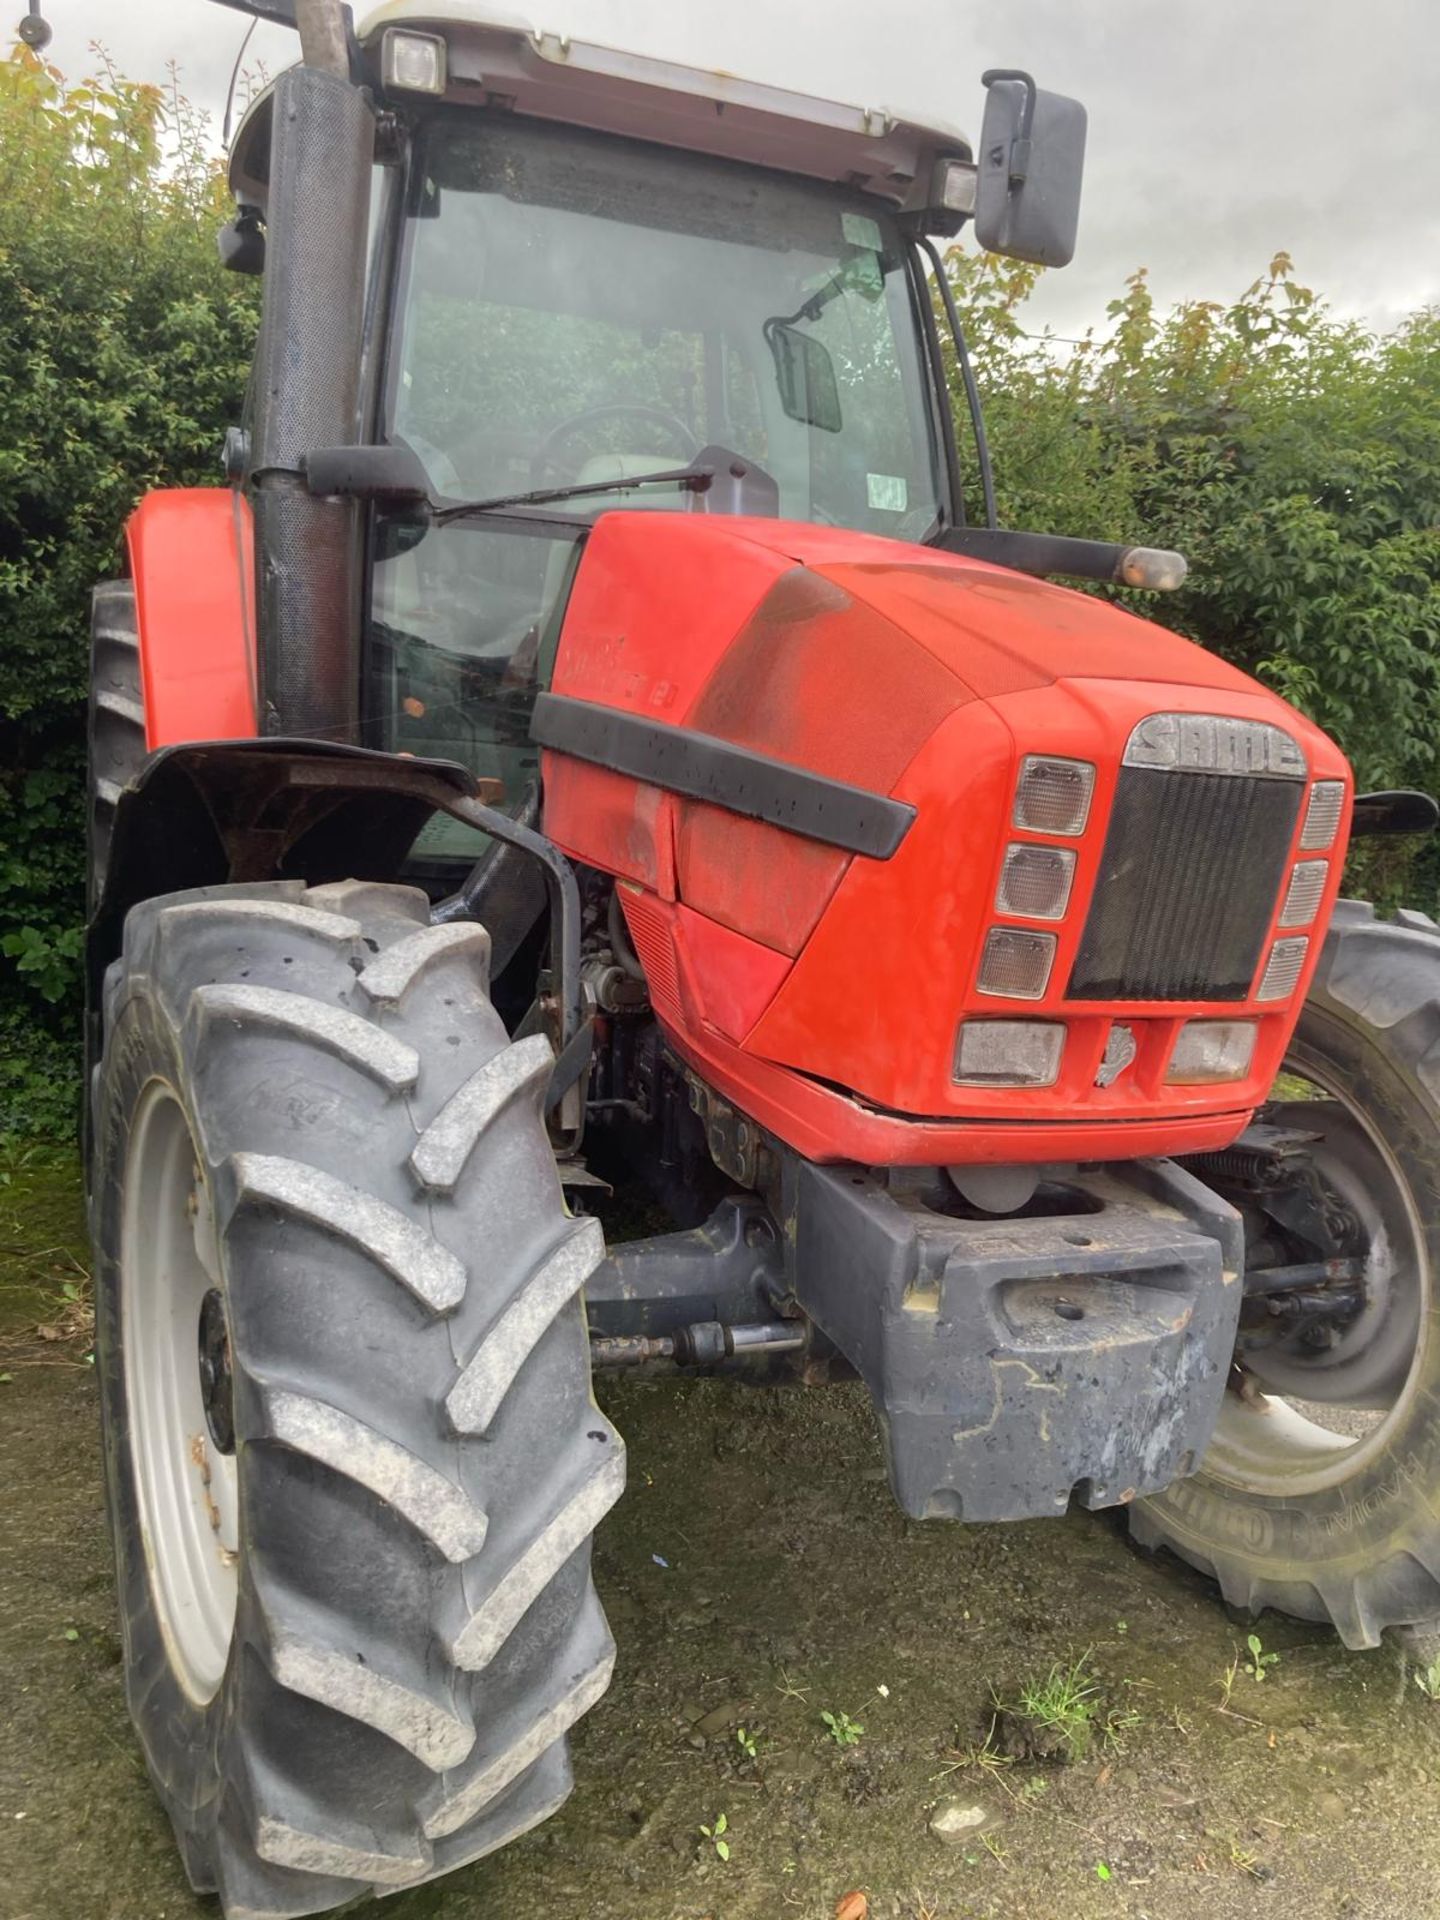 2006 SAME IRON 120 TRACTOR - LOW HOURS 2650